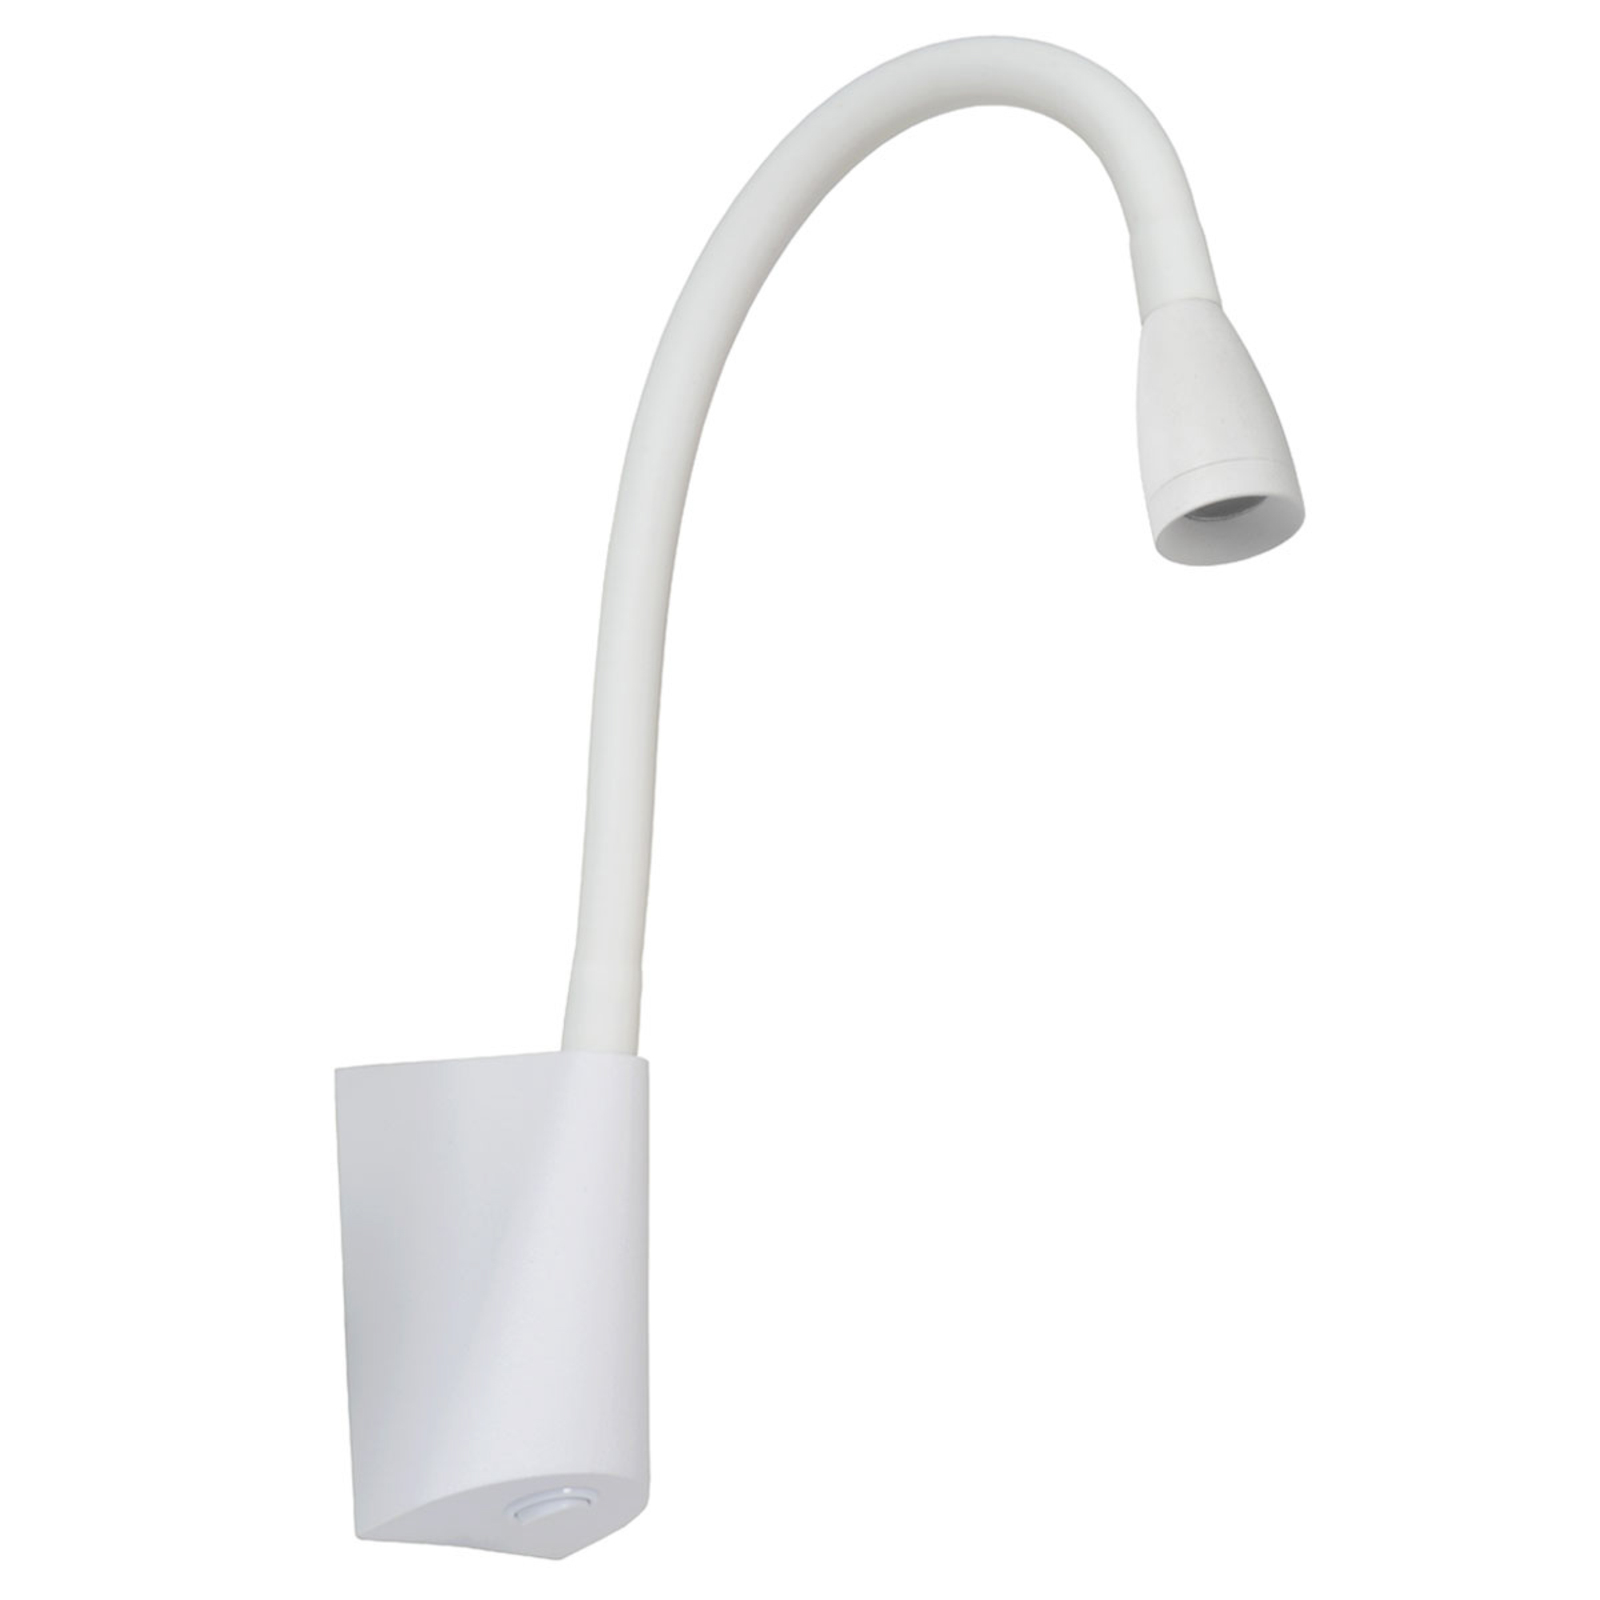 Galen bendable LED wall light in white